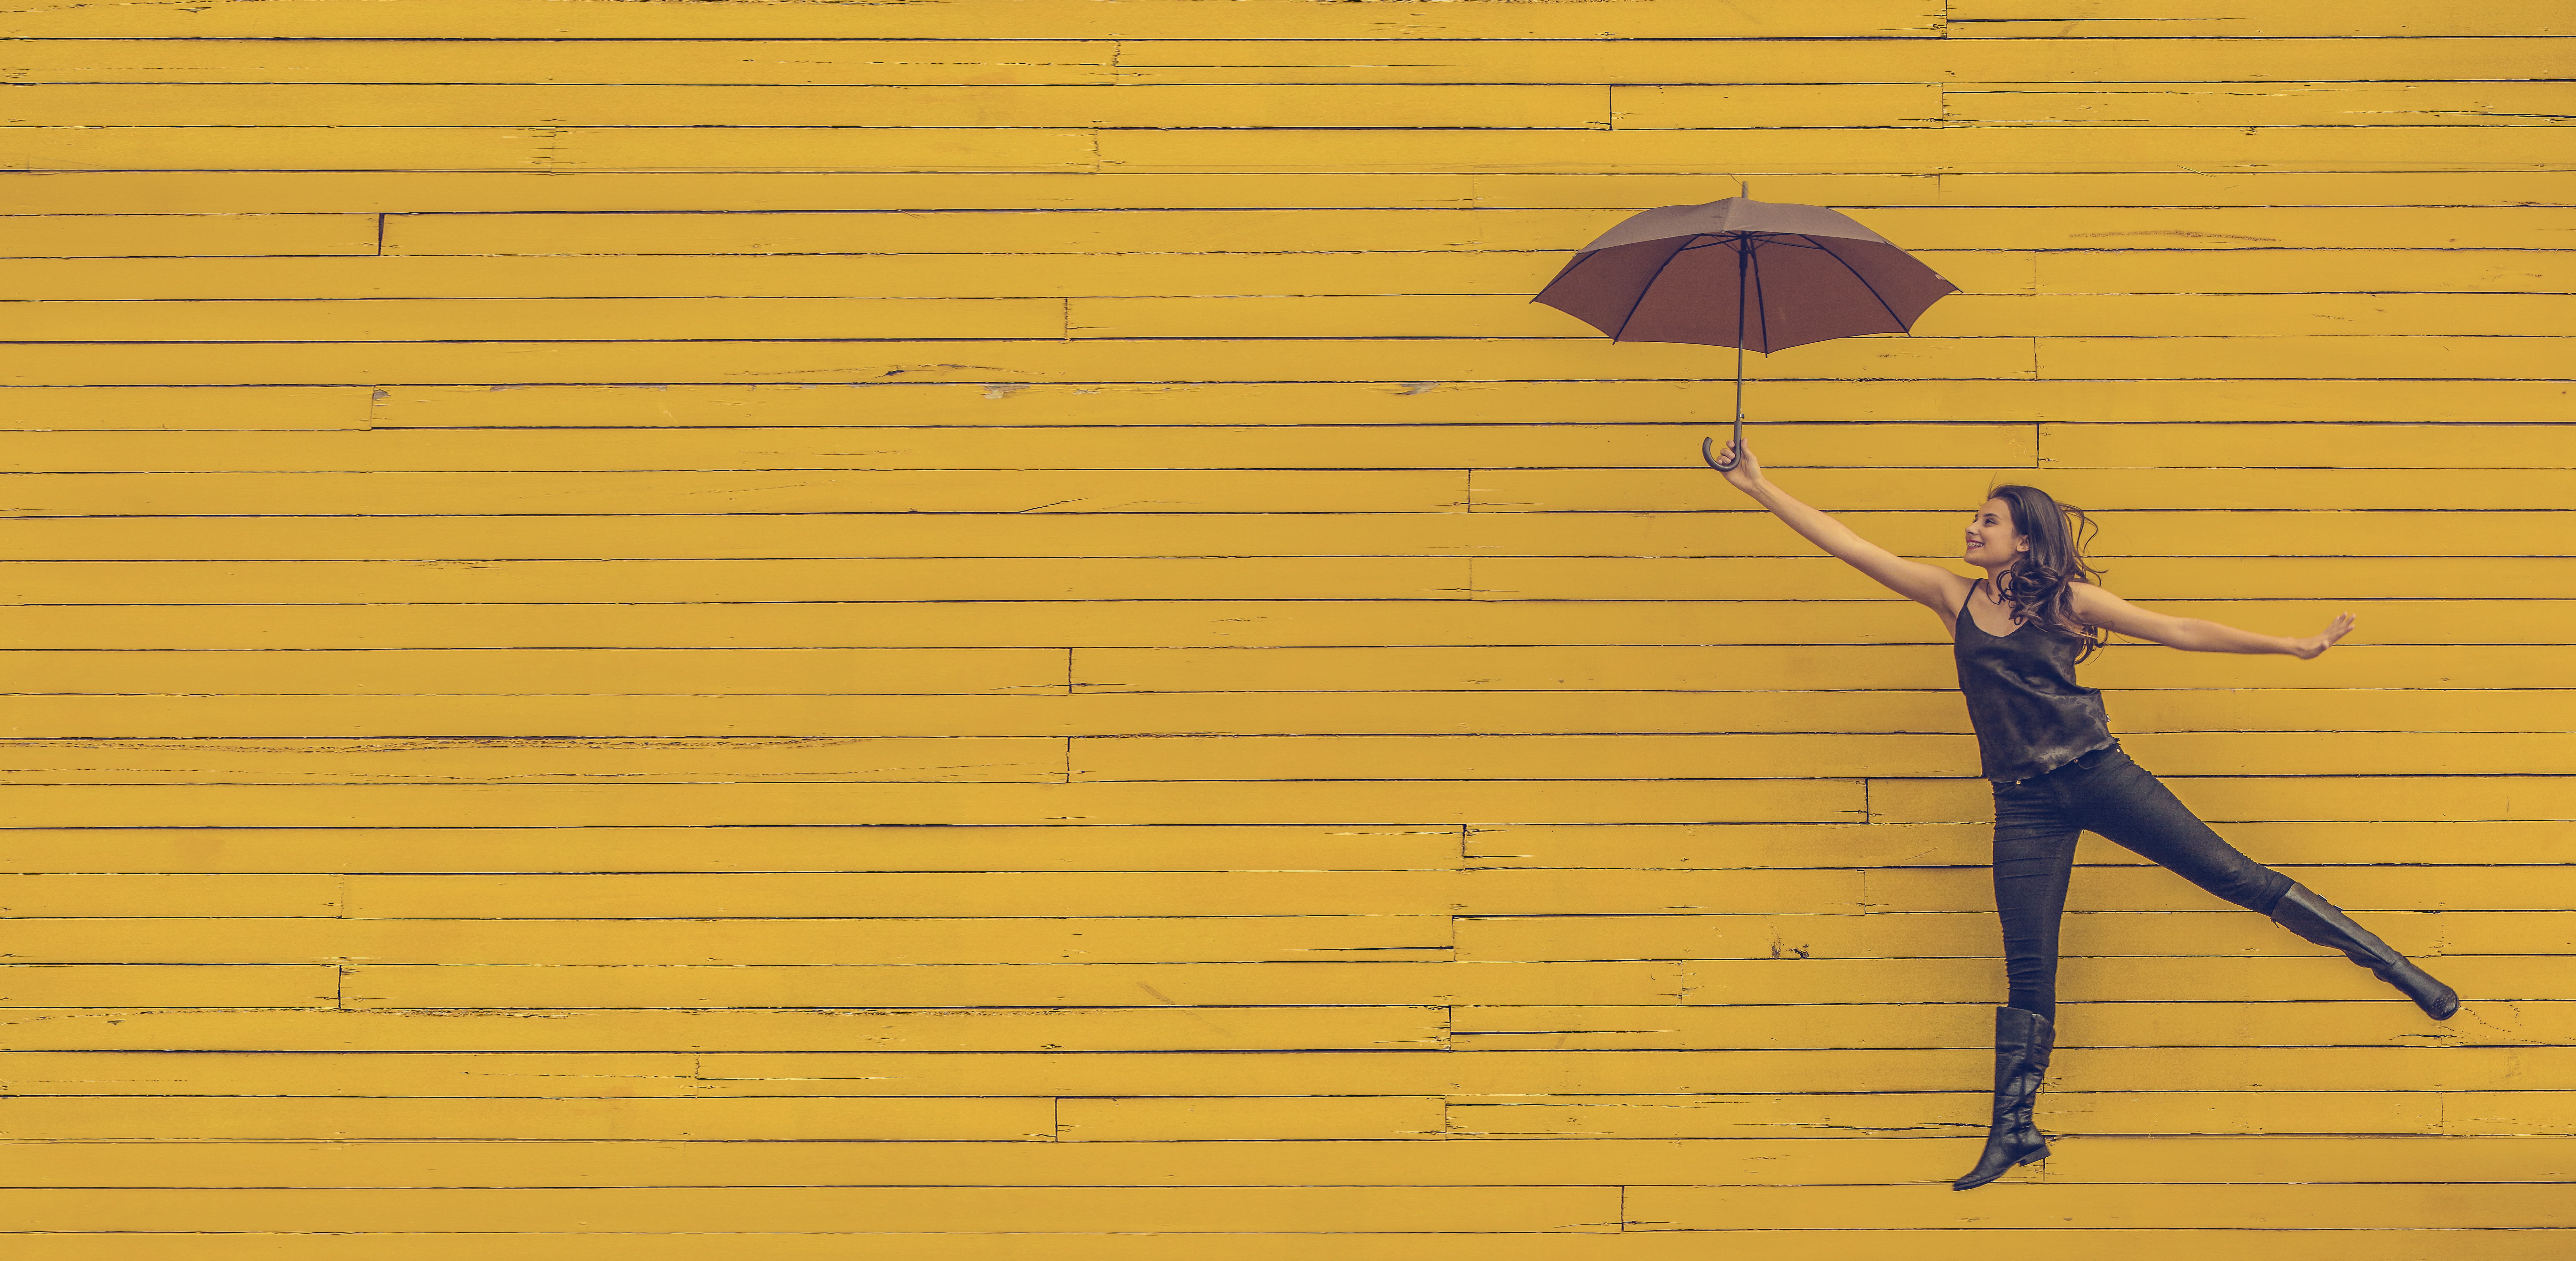 A photo of a girl with an umbrella in front of a yellow wall